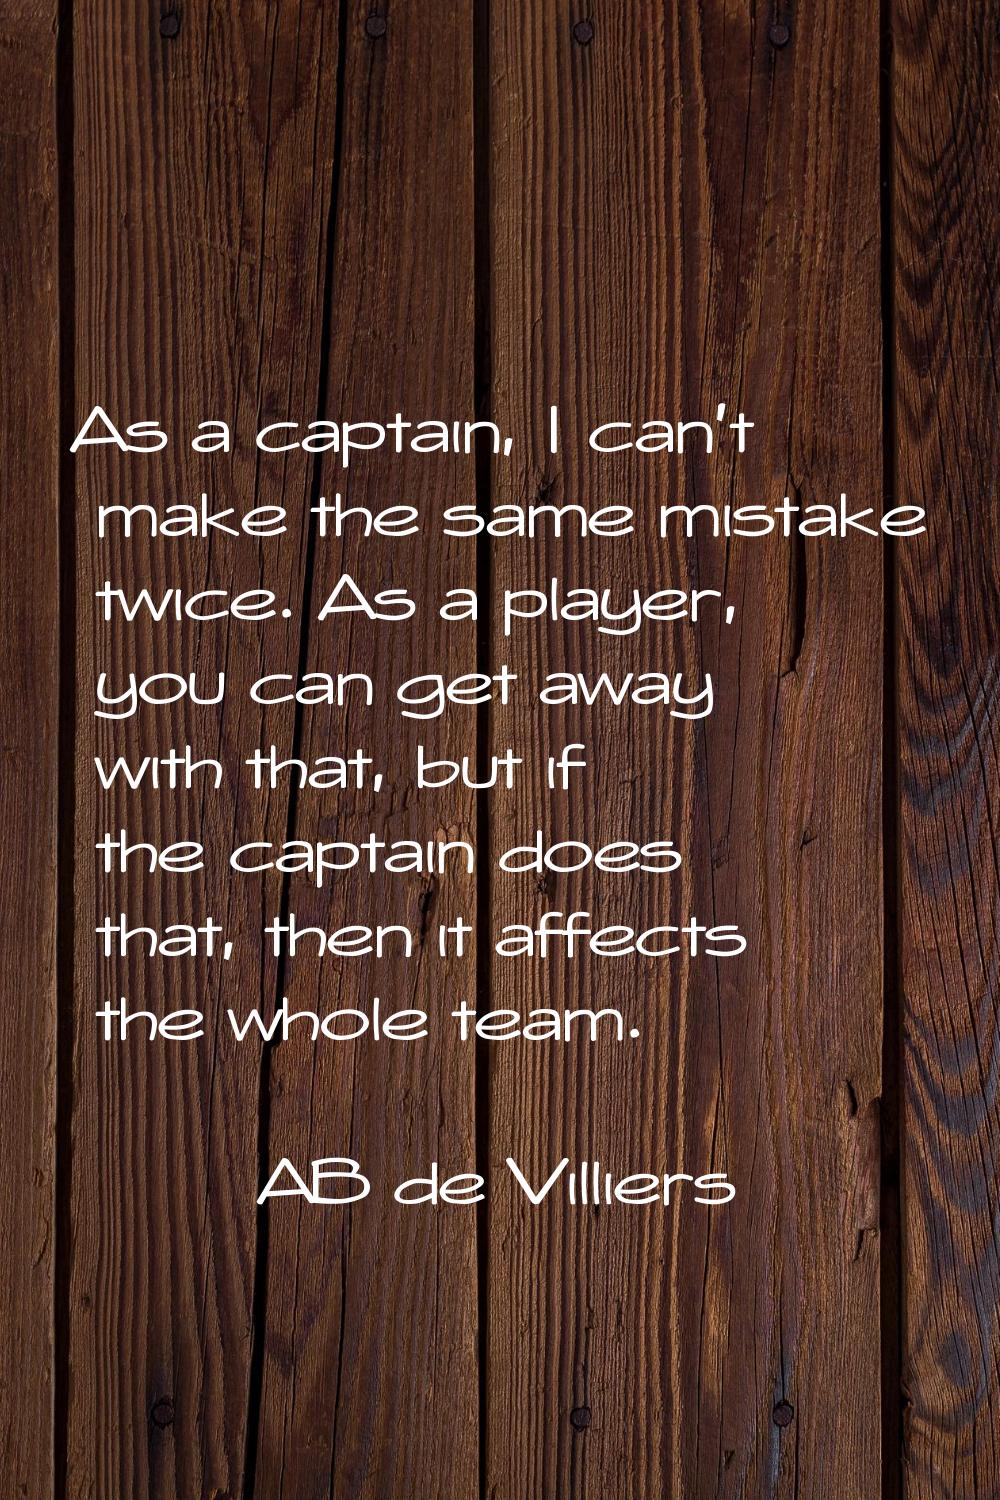 As a captain, I can't make the same mistake twice. As a player, you can get away with that, but if 